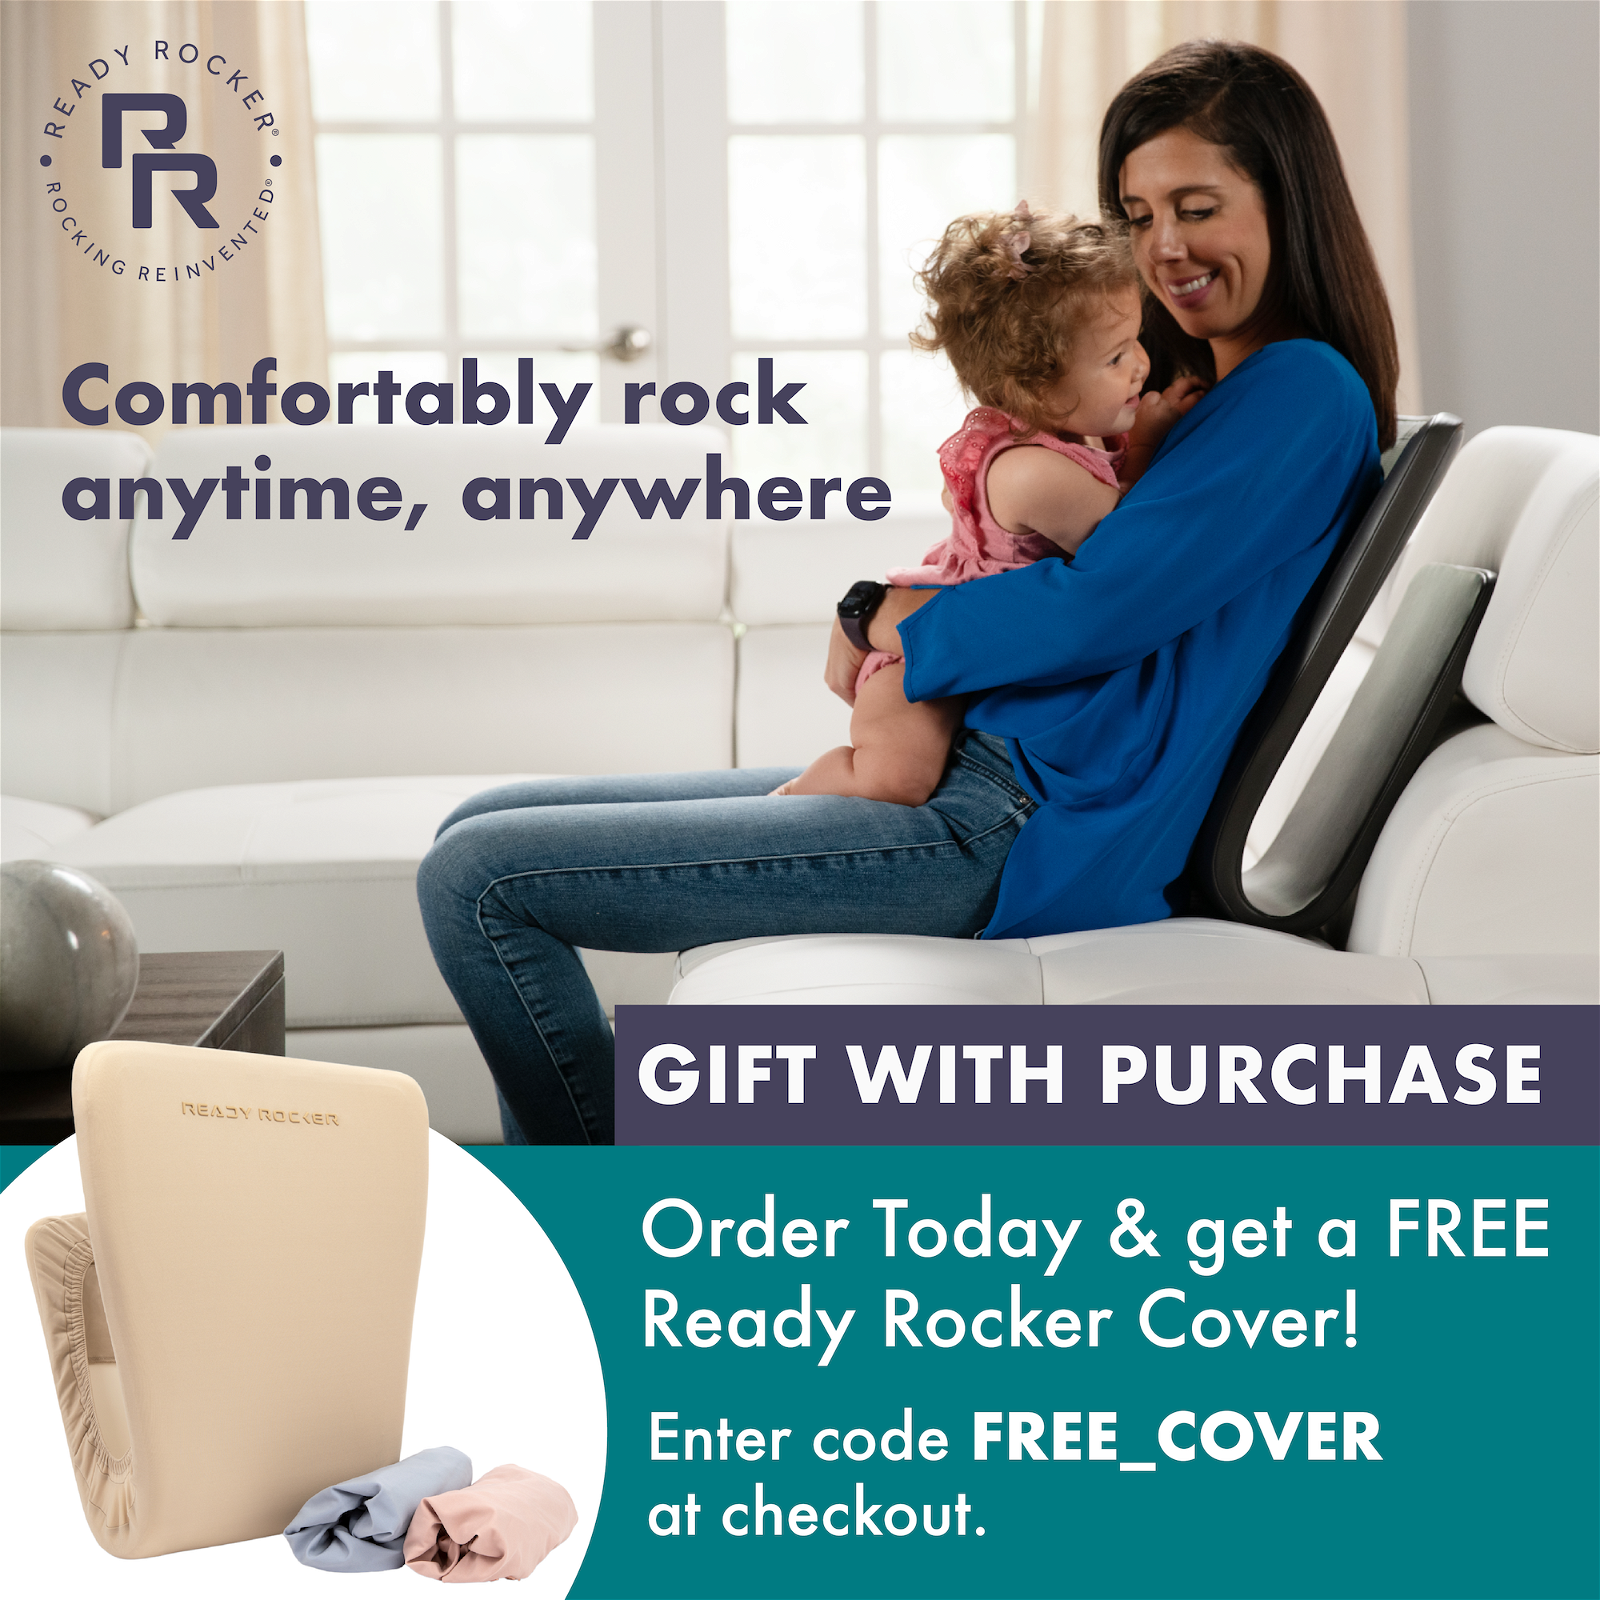 Free Cover with Ready Rocker Purchase